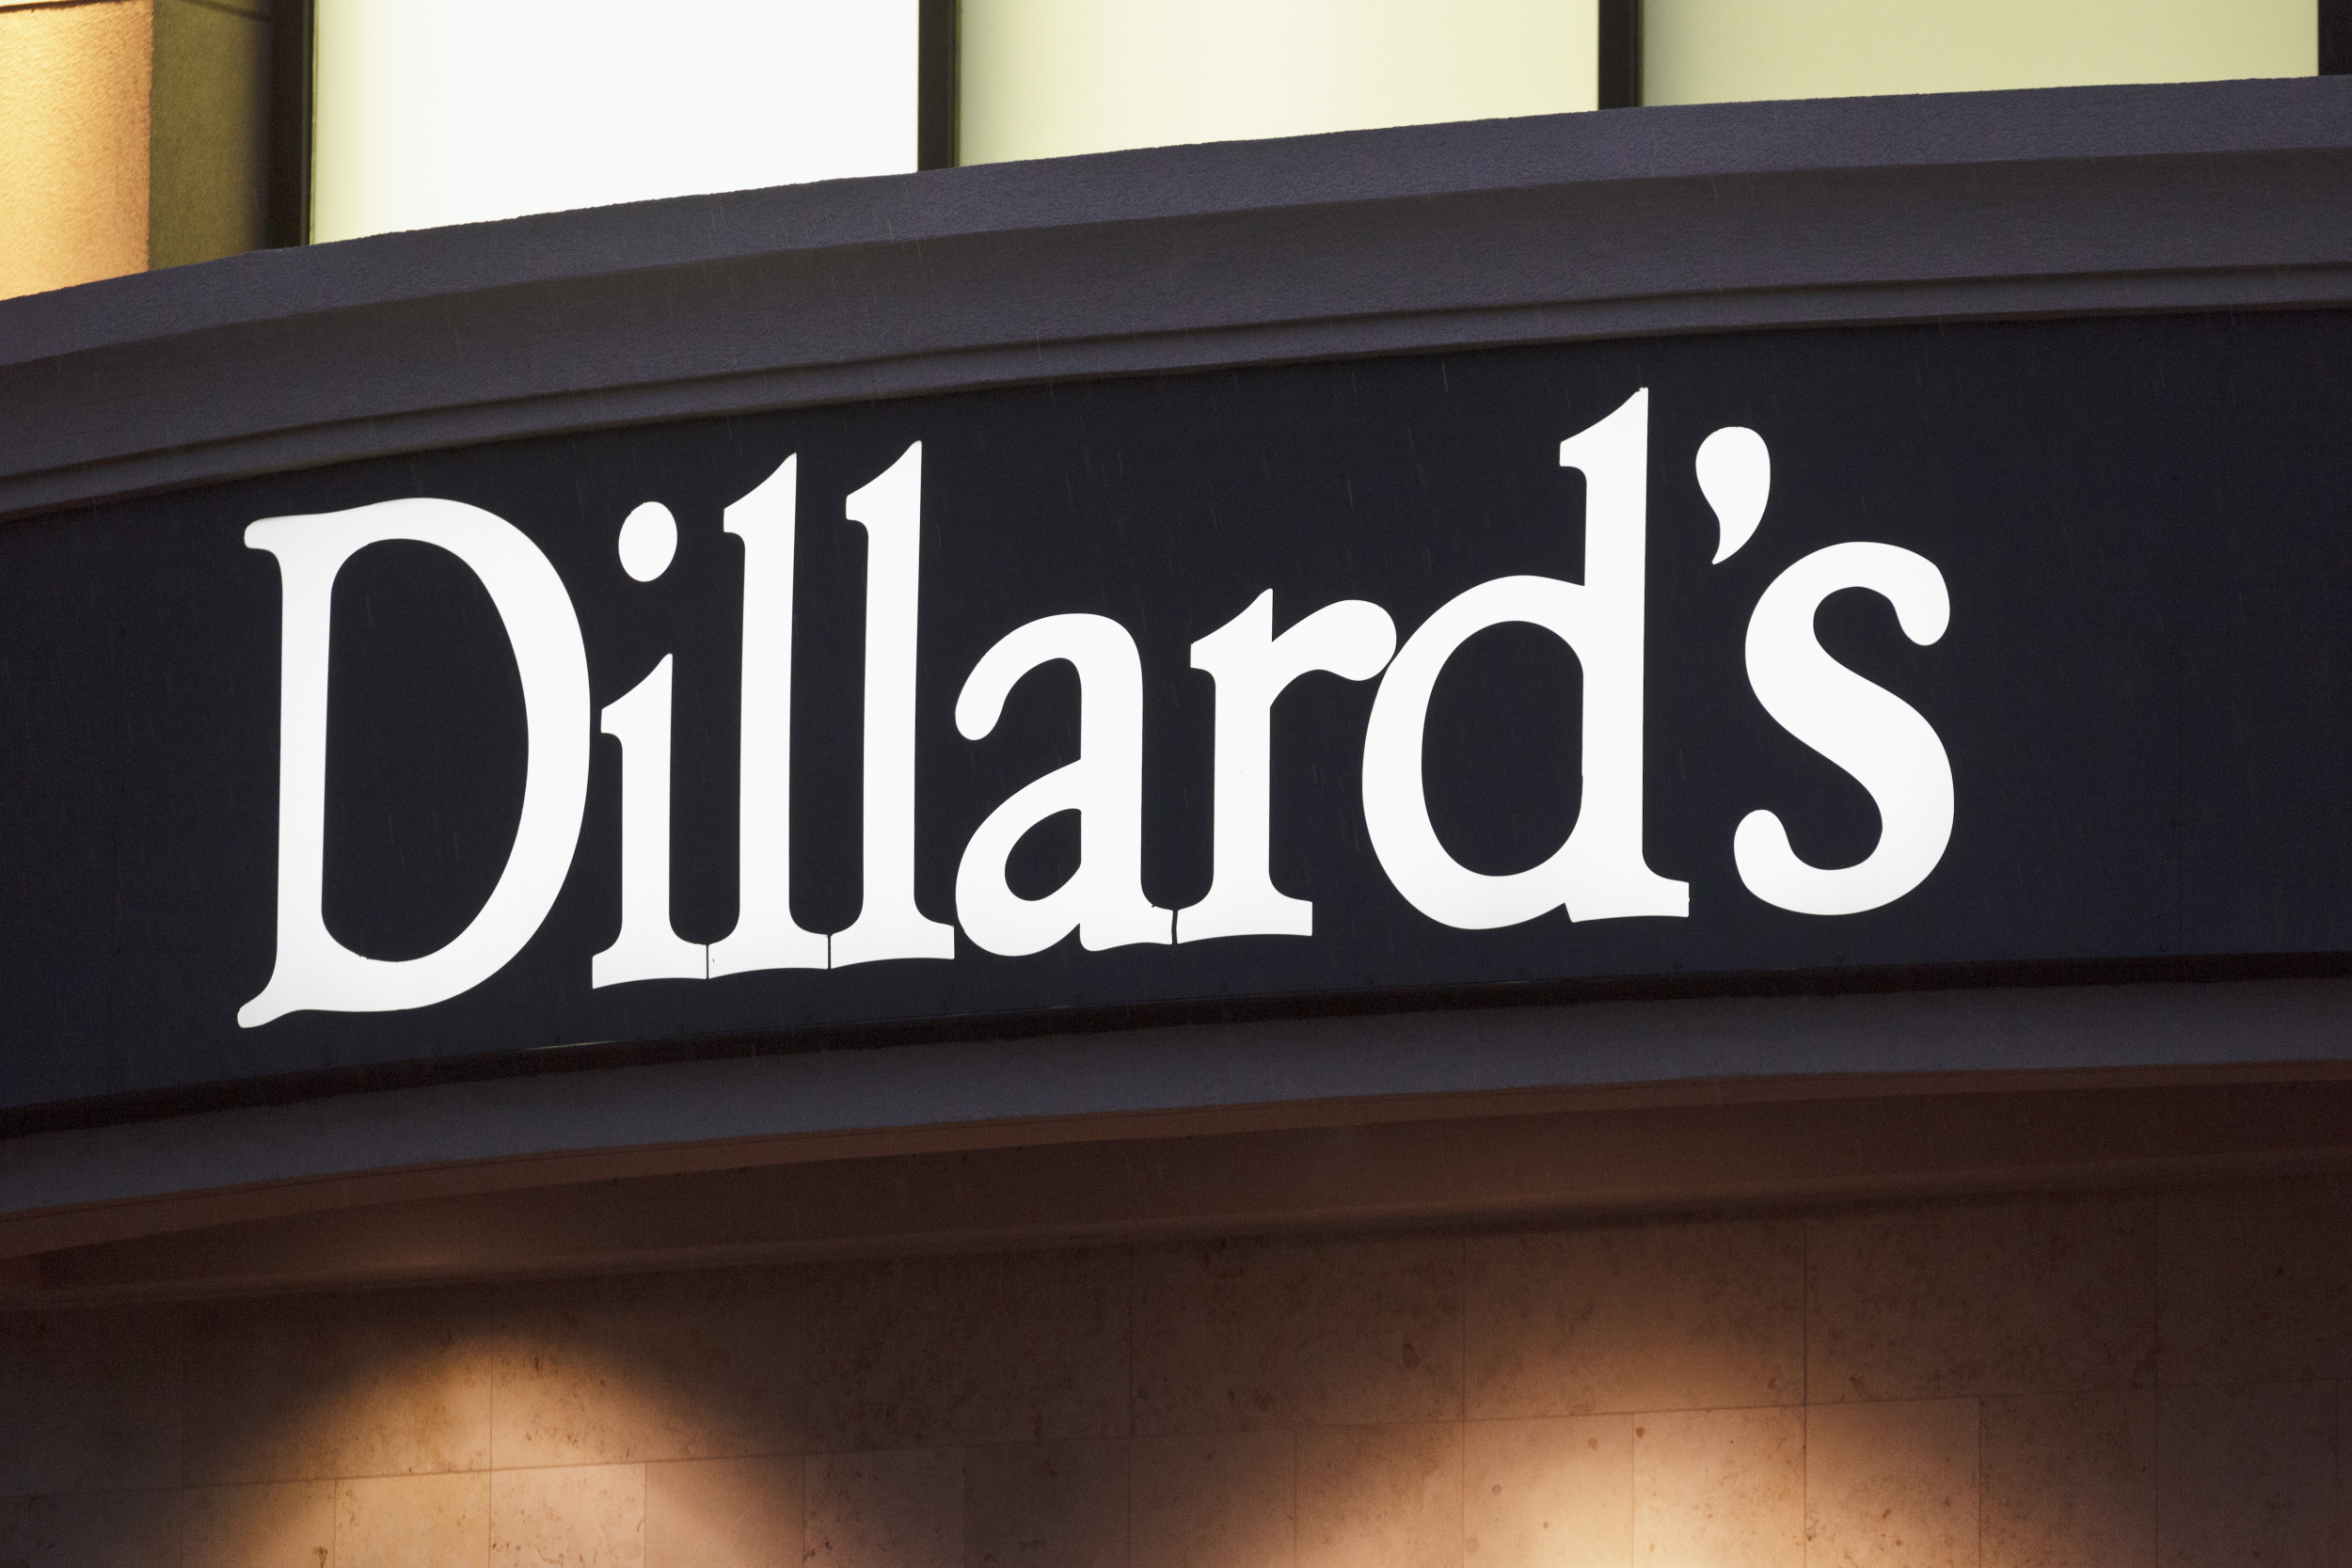 We took a tour through @dillards recently and just had to share